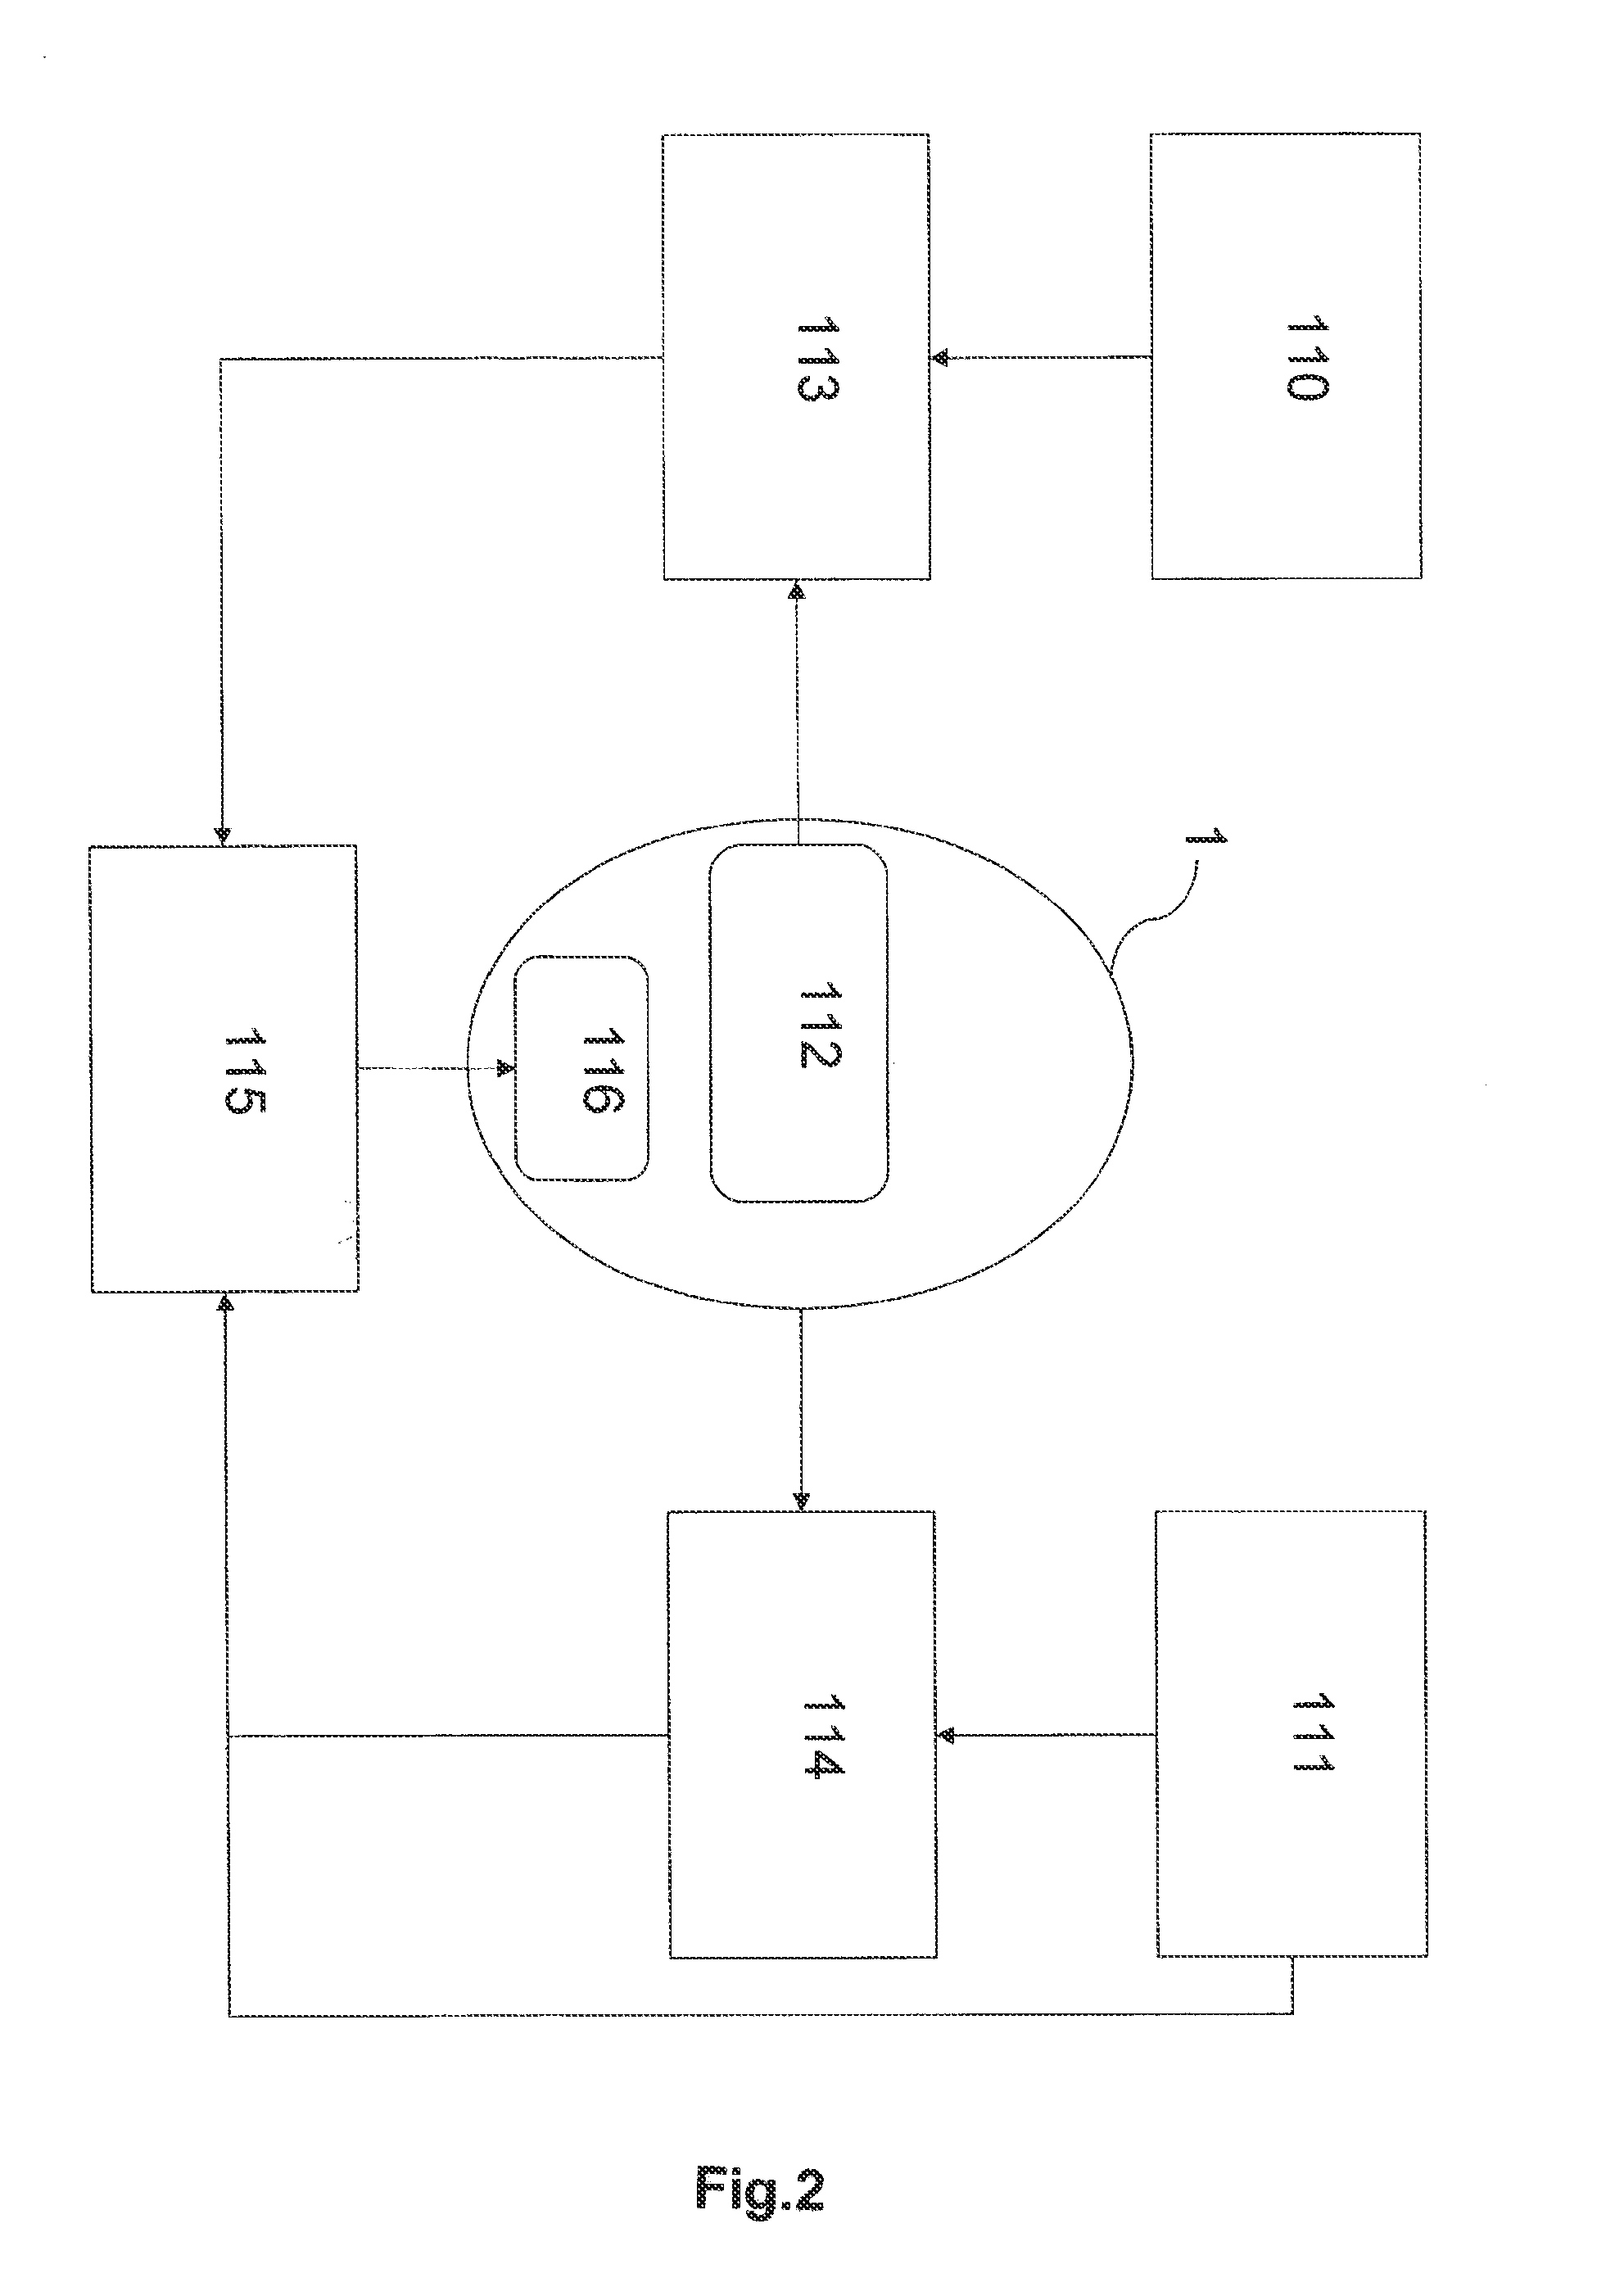 Method for adapting security policies of an information system infrastructure